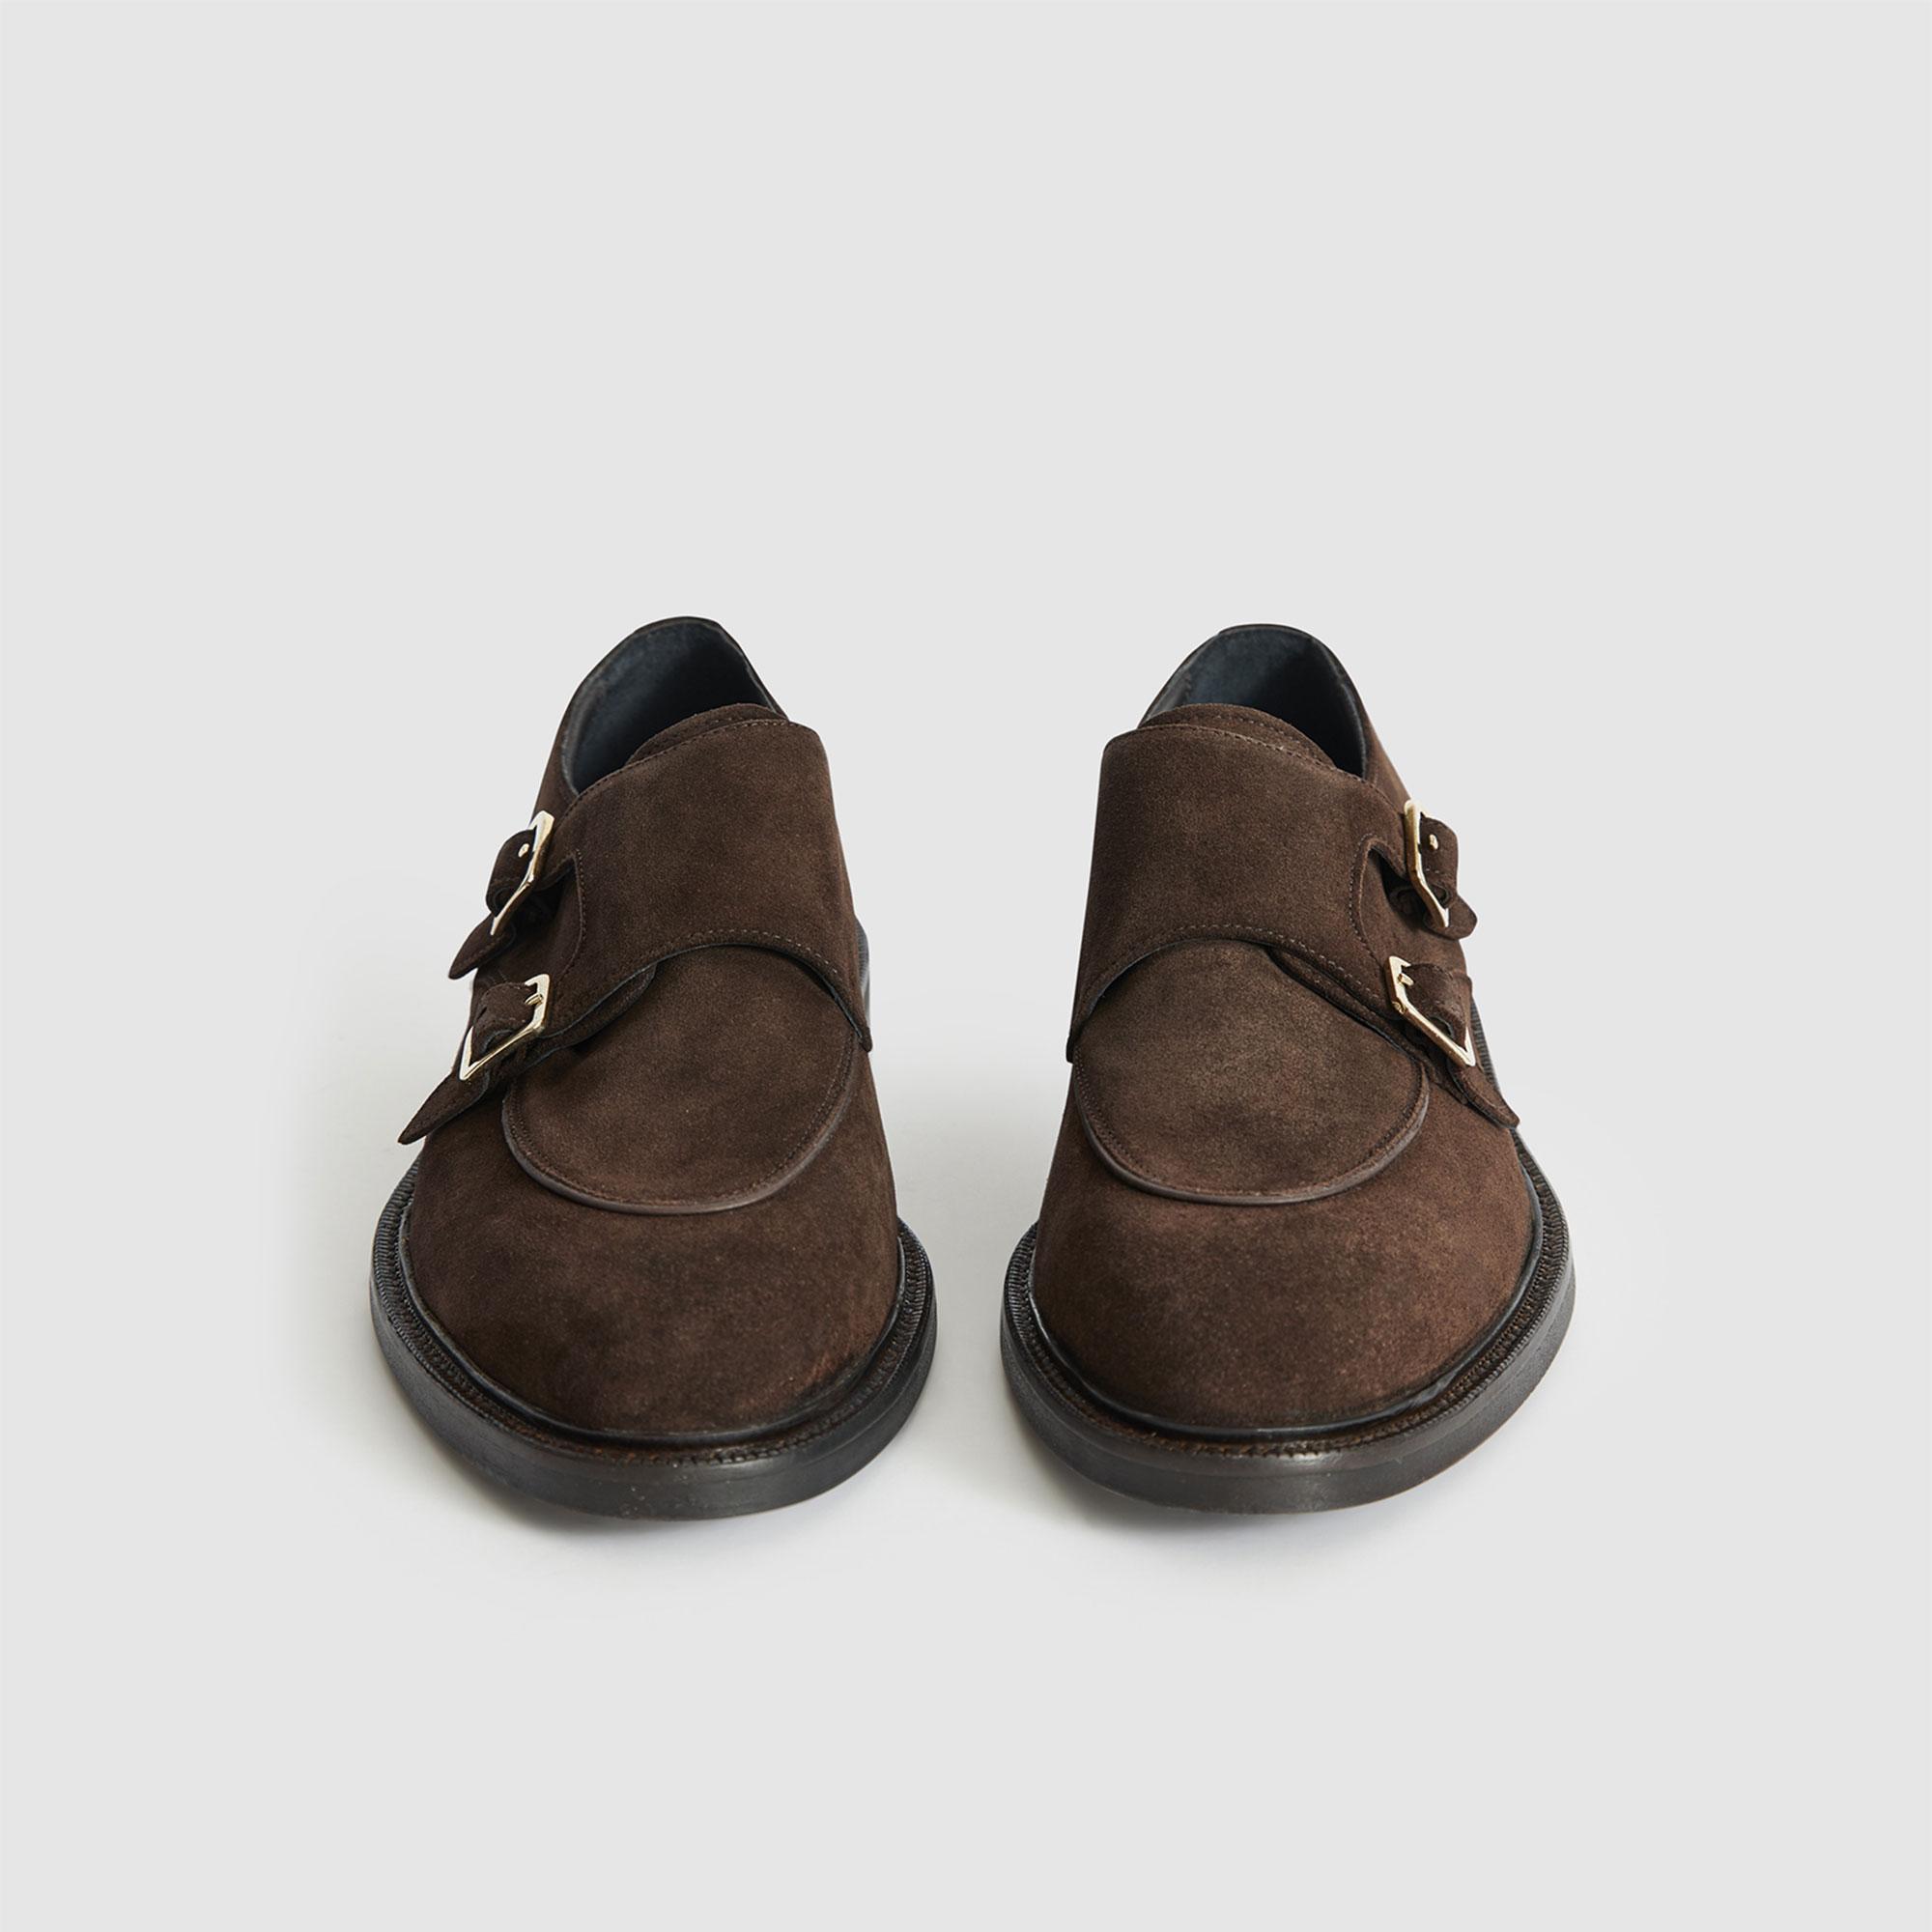 Jake Suede Monk Shoes